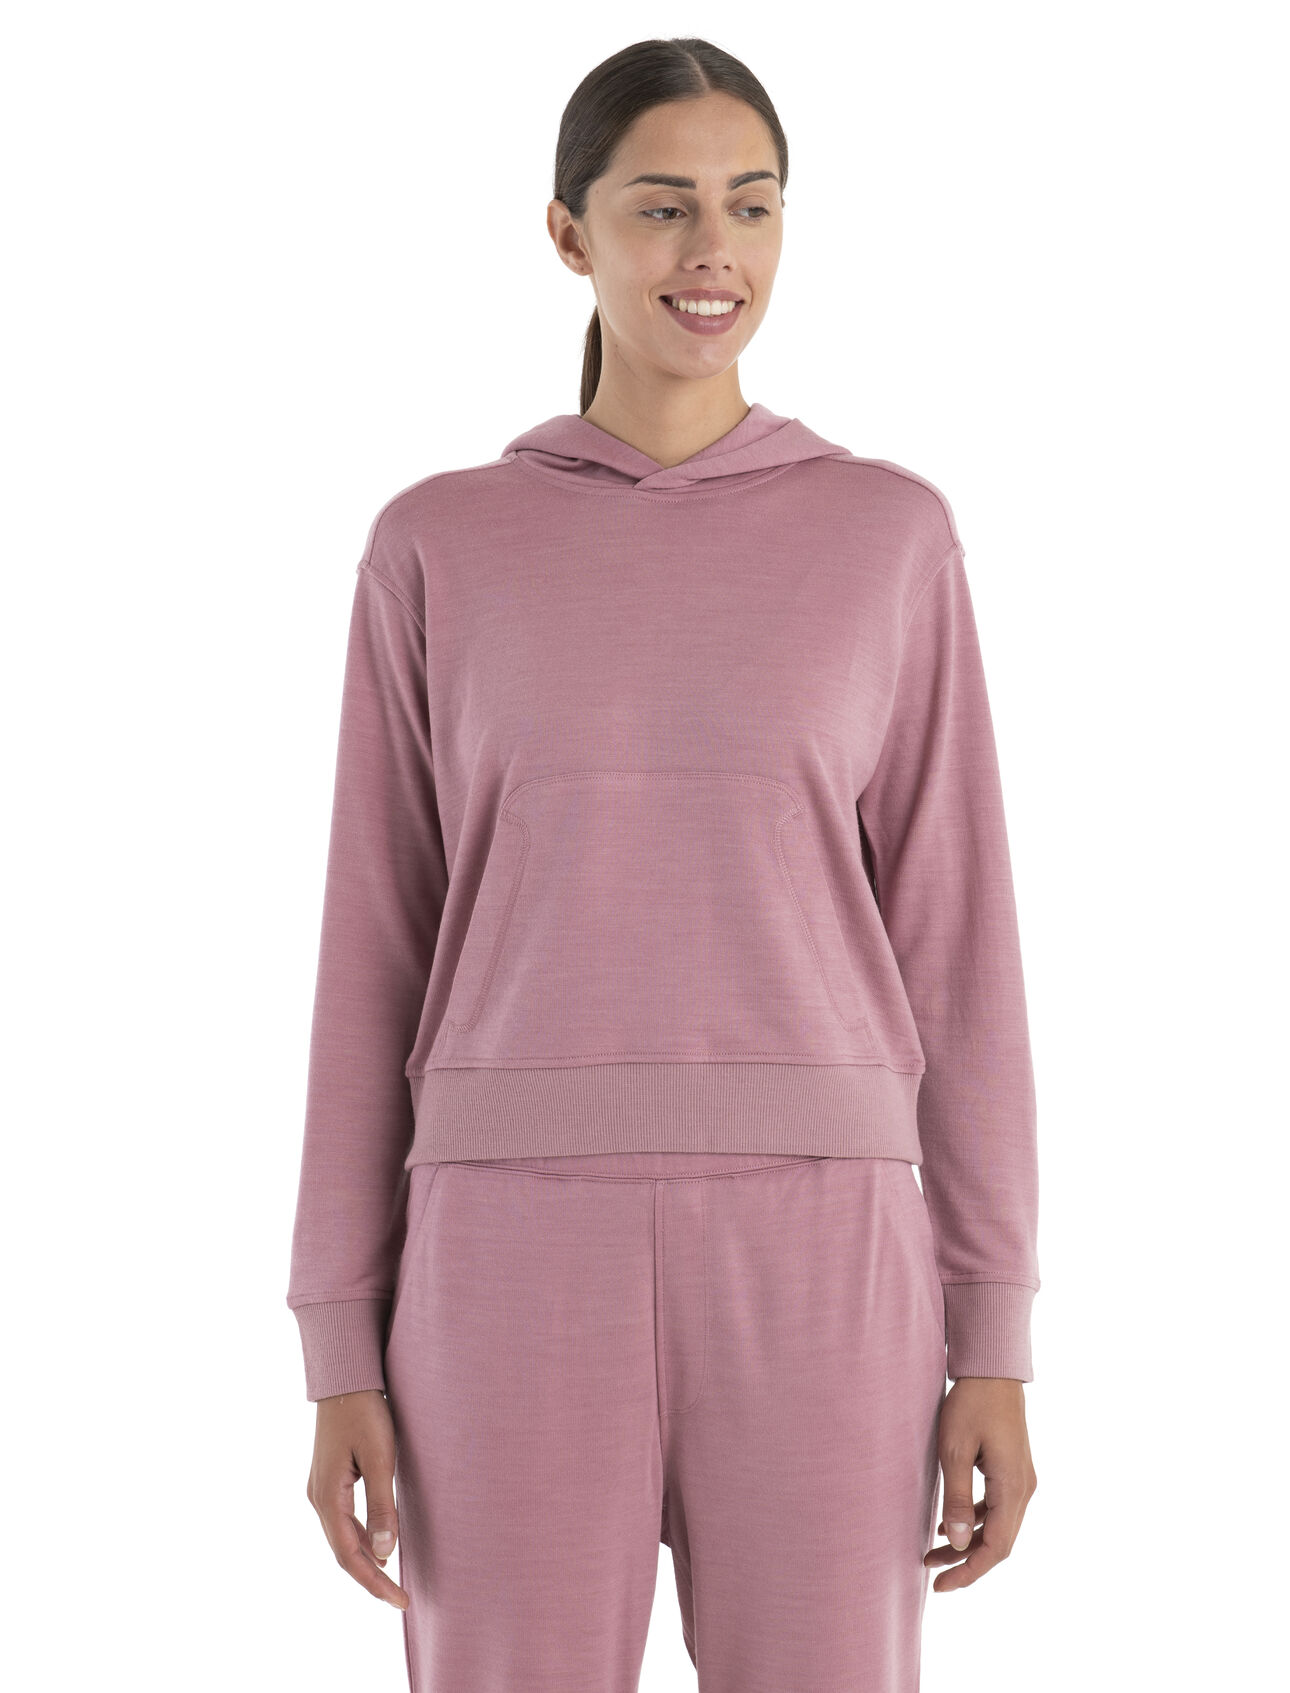 Womens Merino Blend Crush II Long Sleeve Hoodie The ultimate in down-time comfort, the Crush II Long Sleeve Hoodie is a clean and classic pullover made with our Eucaform fabric—a blend of natural merino wool and plant-based TENCEL™ Lyocell terry.